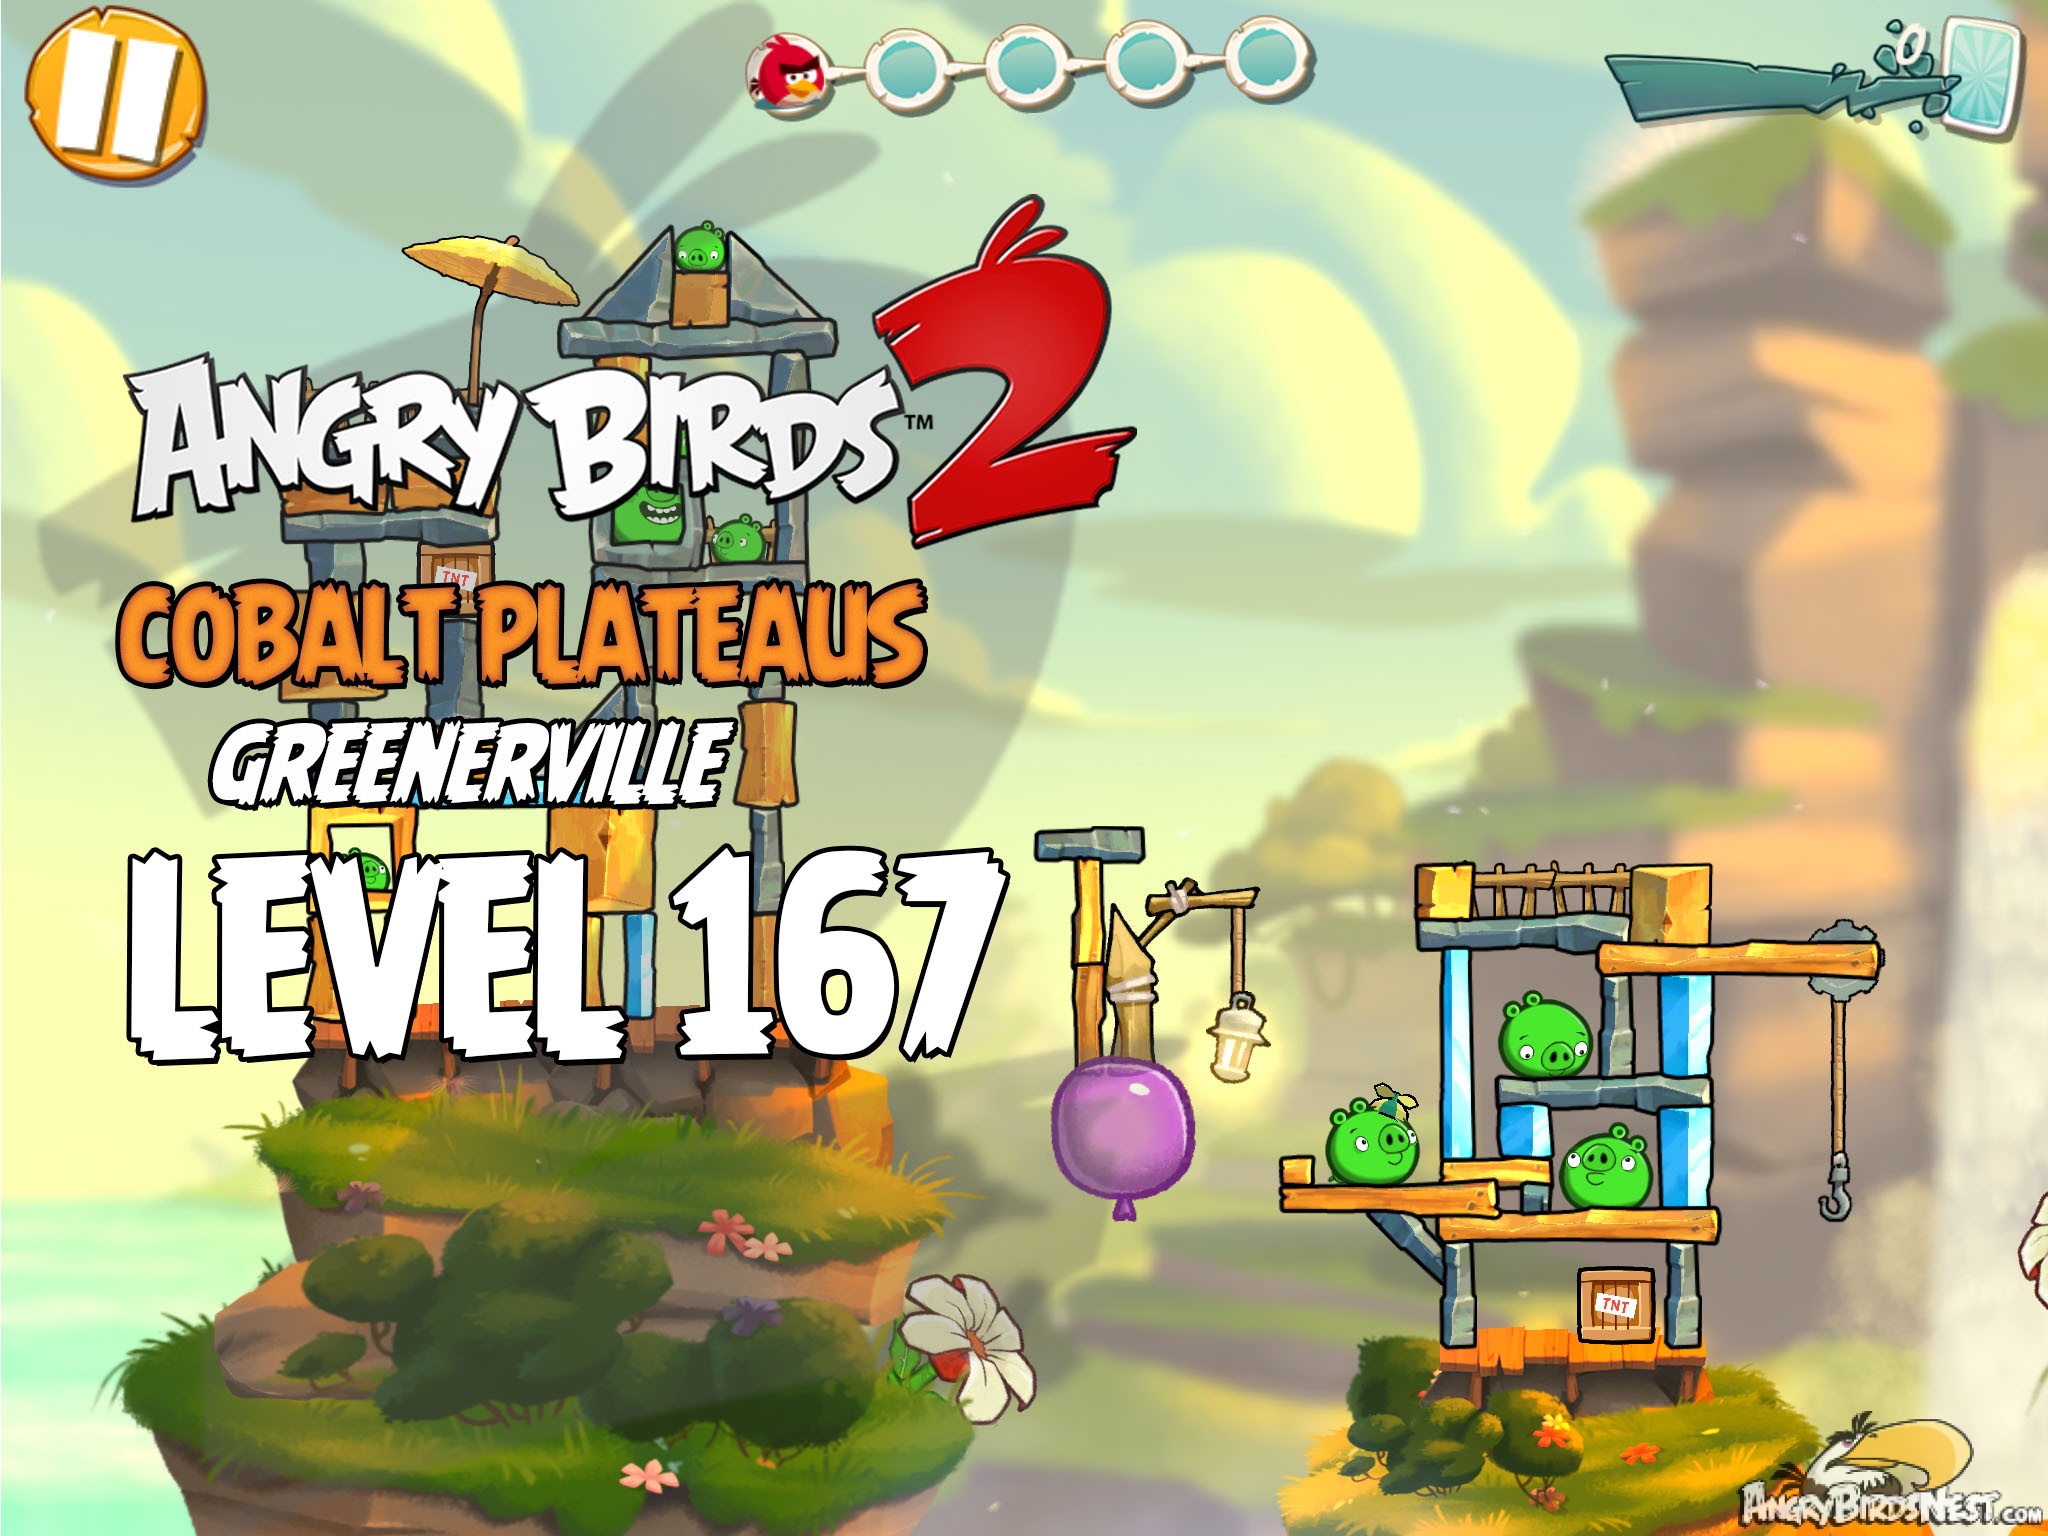 Angry Birds 2 Cobalt Plateaus Greenerville Level 167